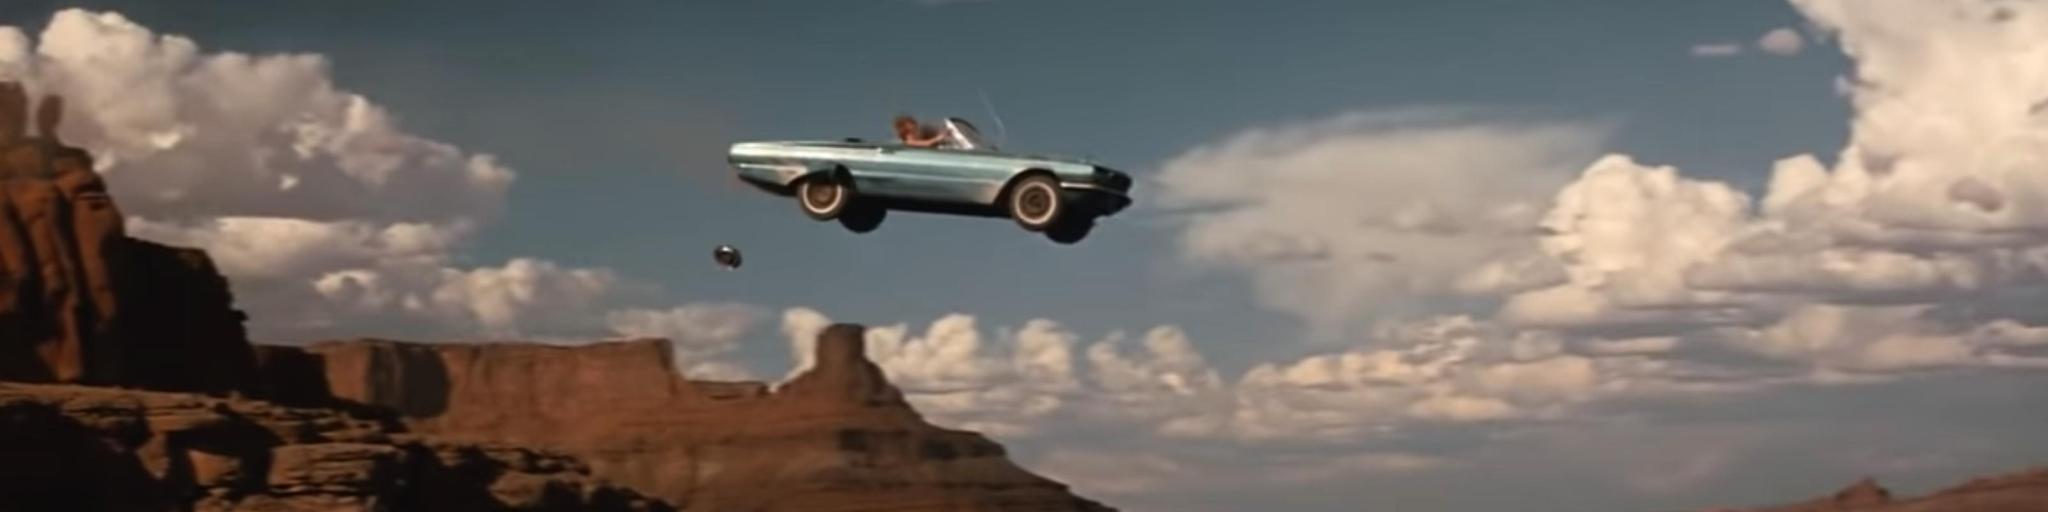 The car drives off the canyon cliff in the final scene of Thelma & Louise